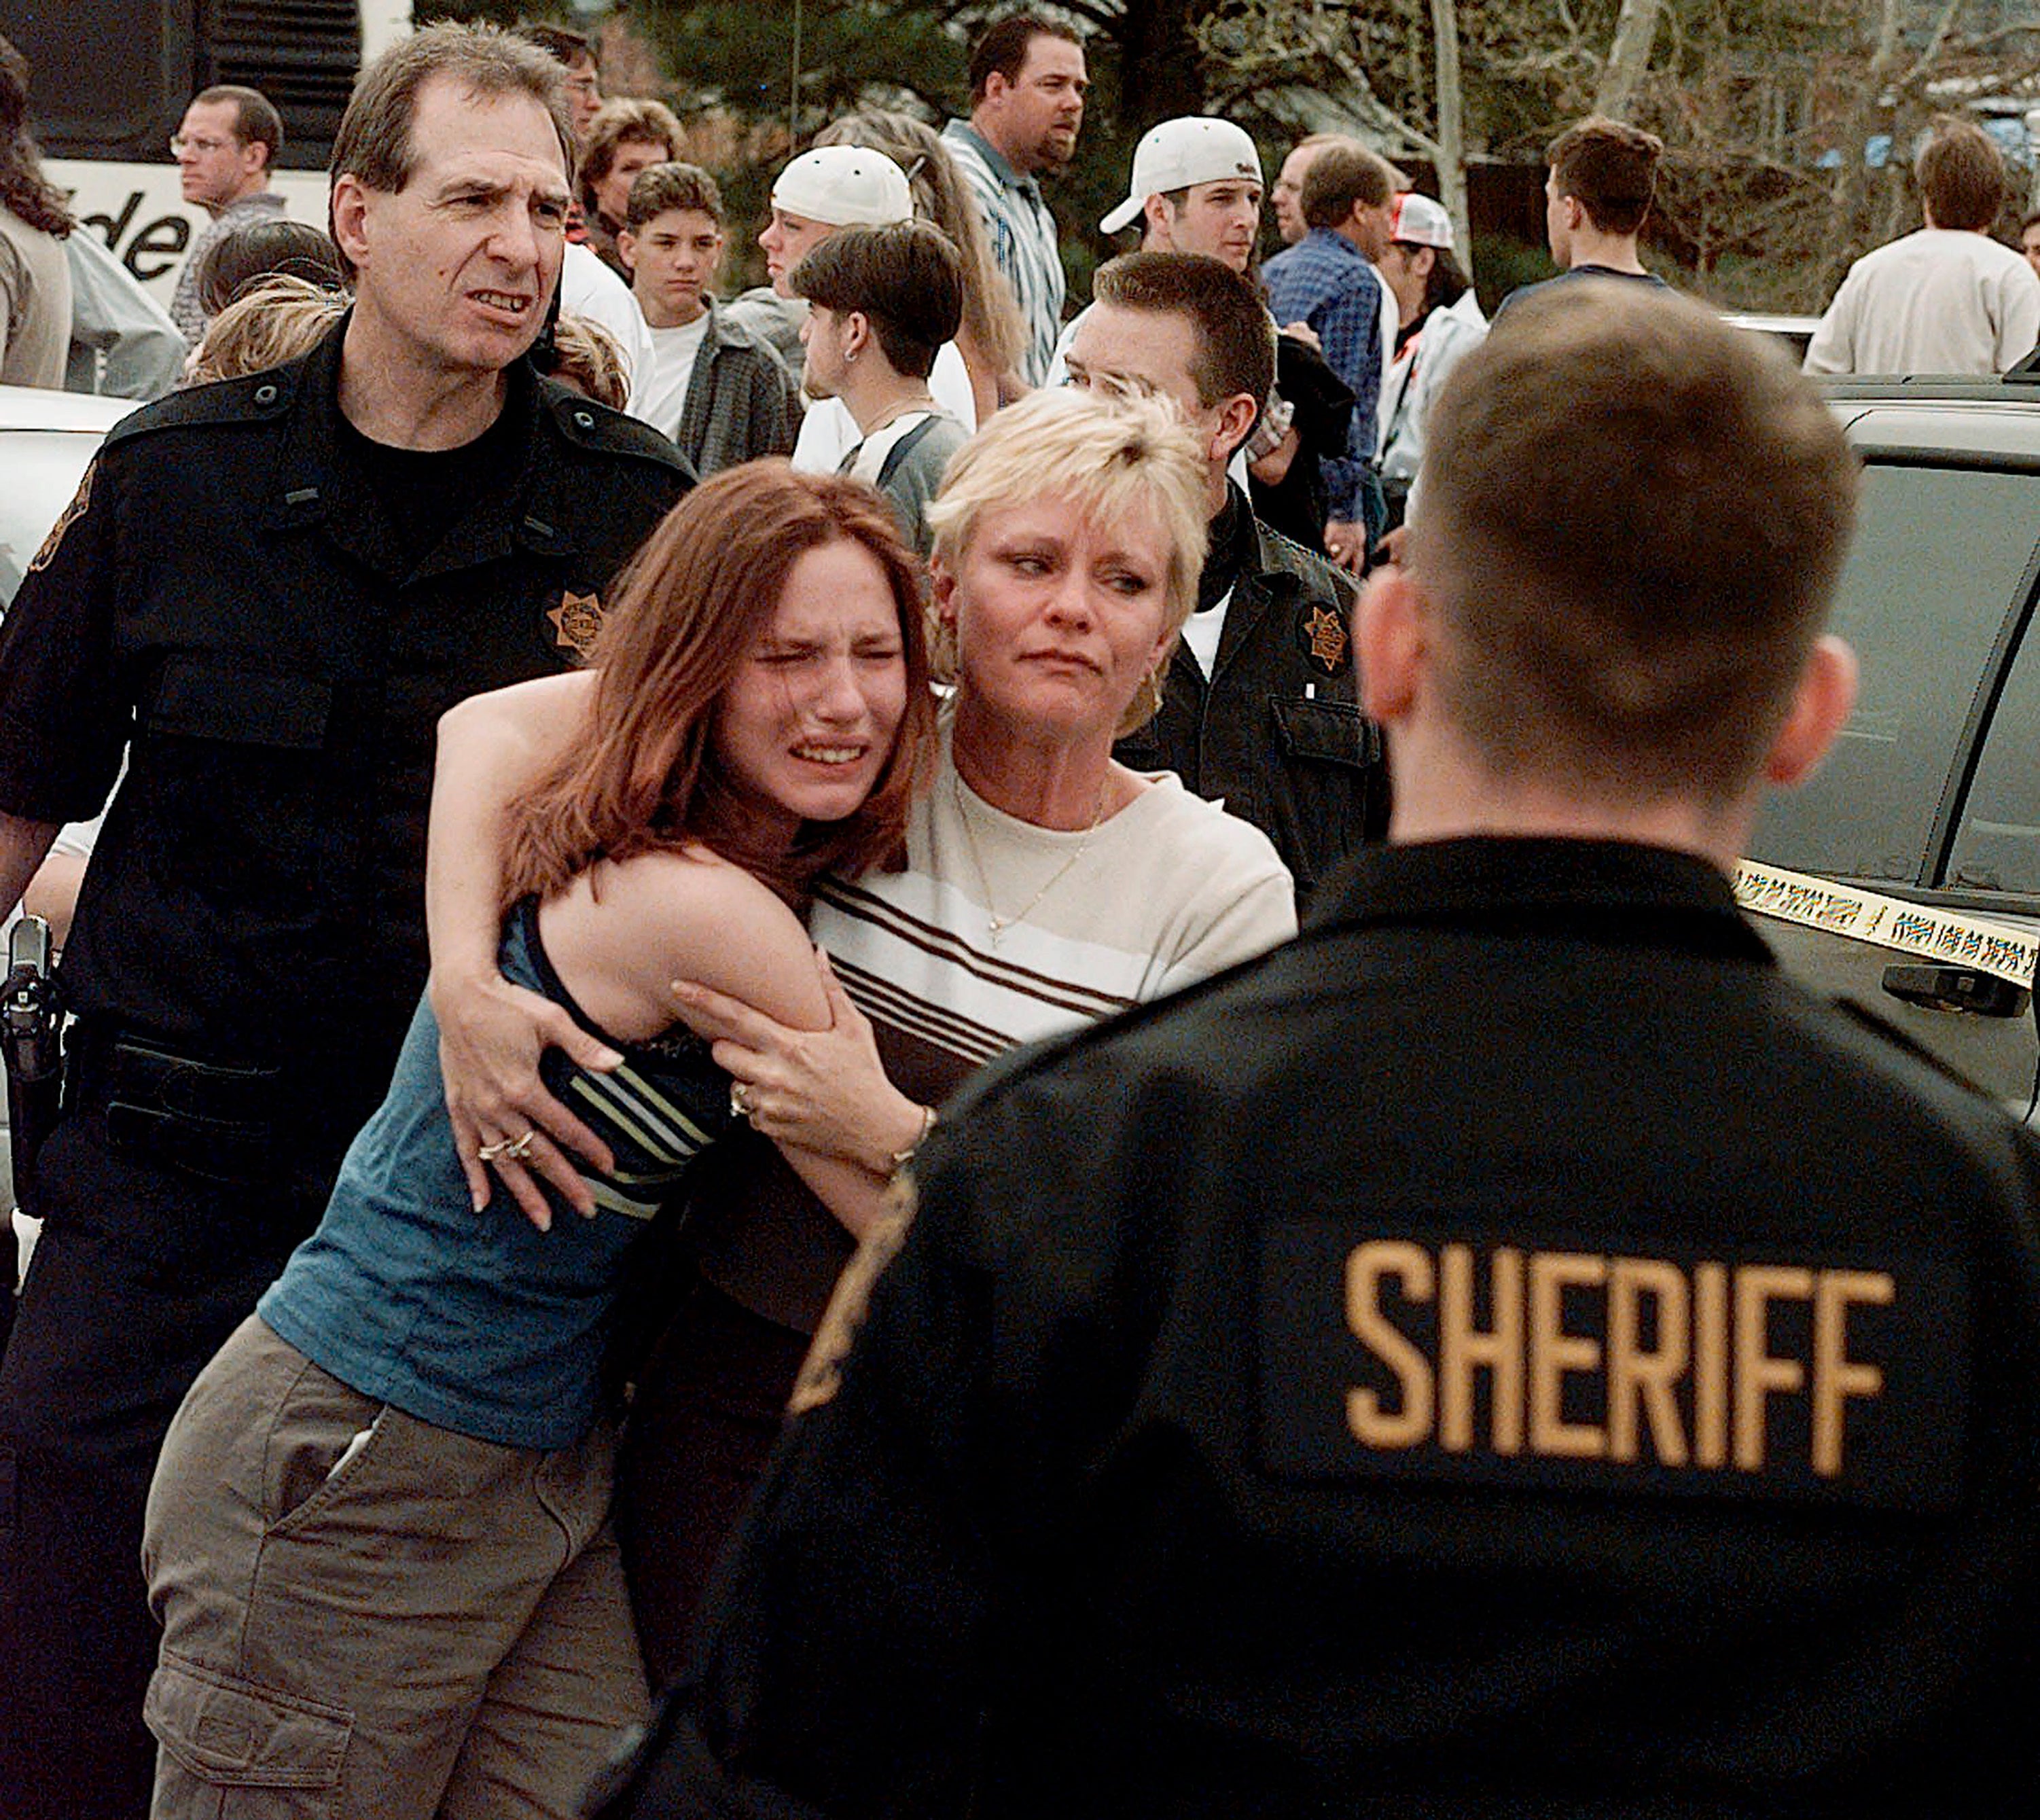 A woman embraces her daughter after they were reunited following the Columbine shooting in April 1999